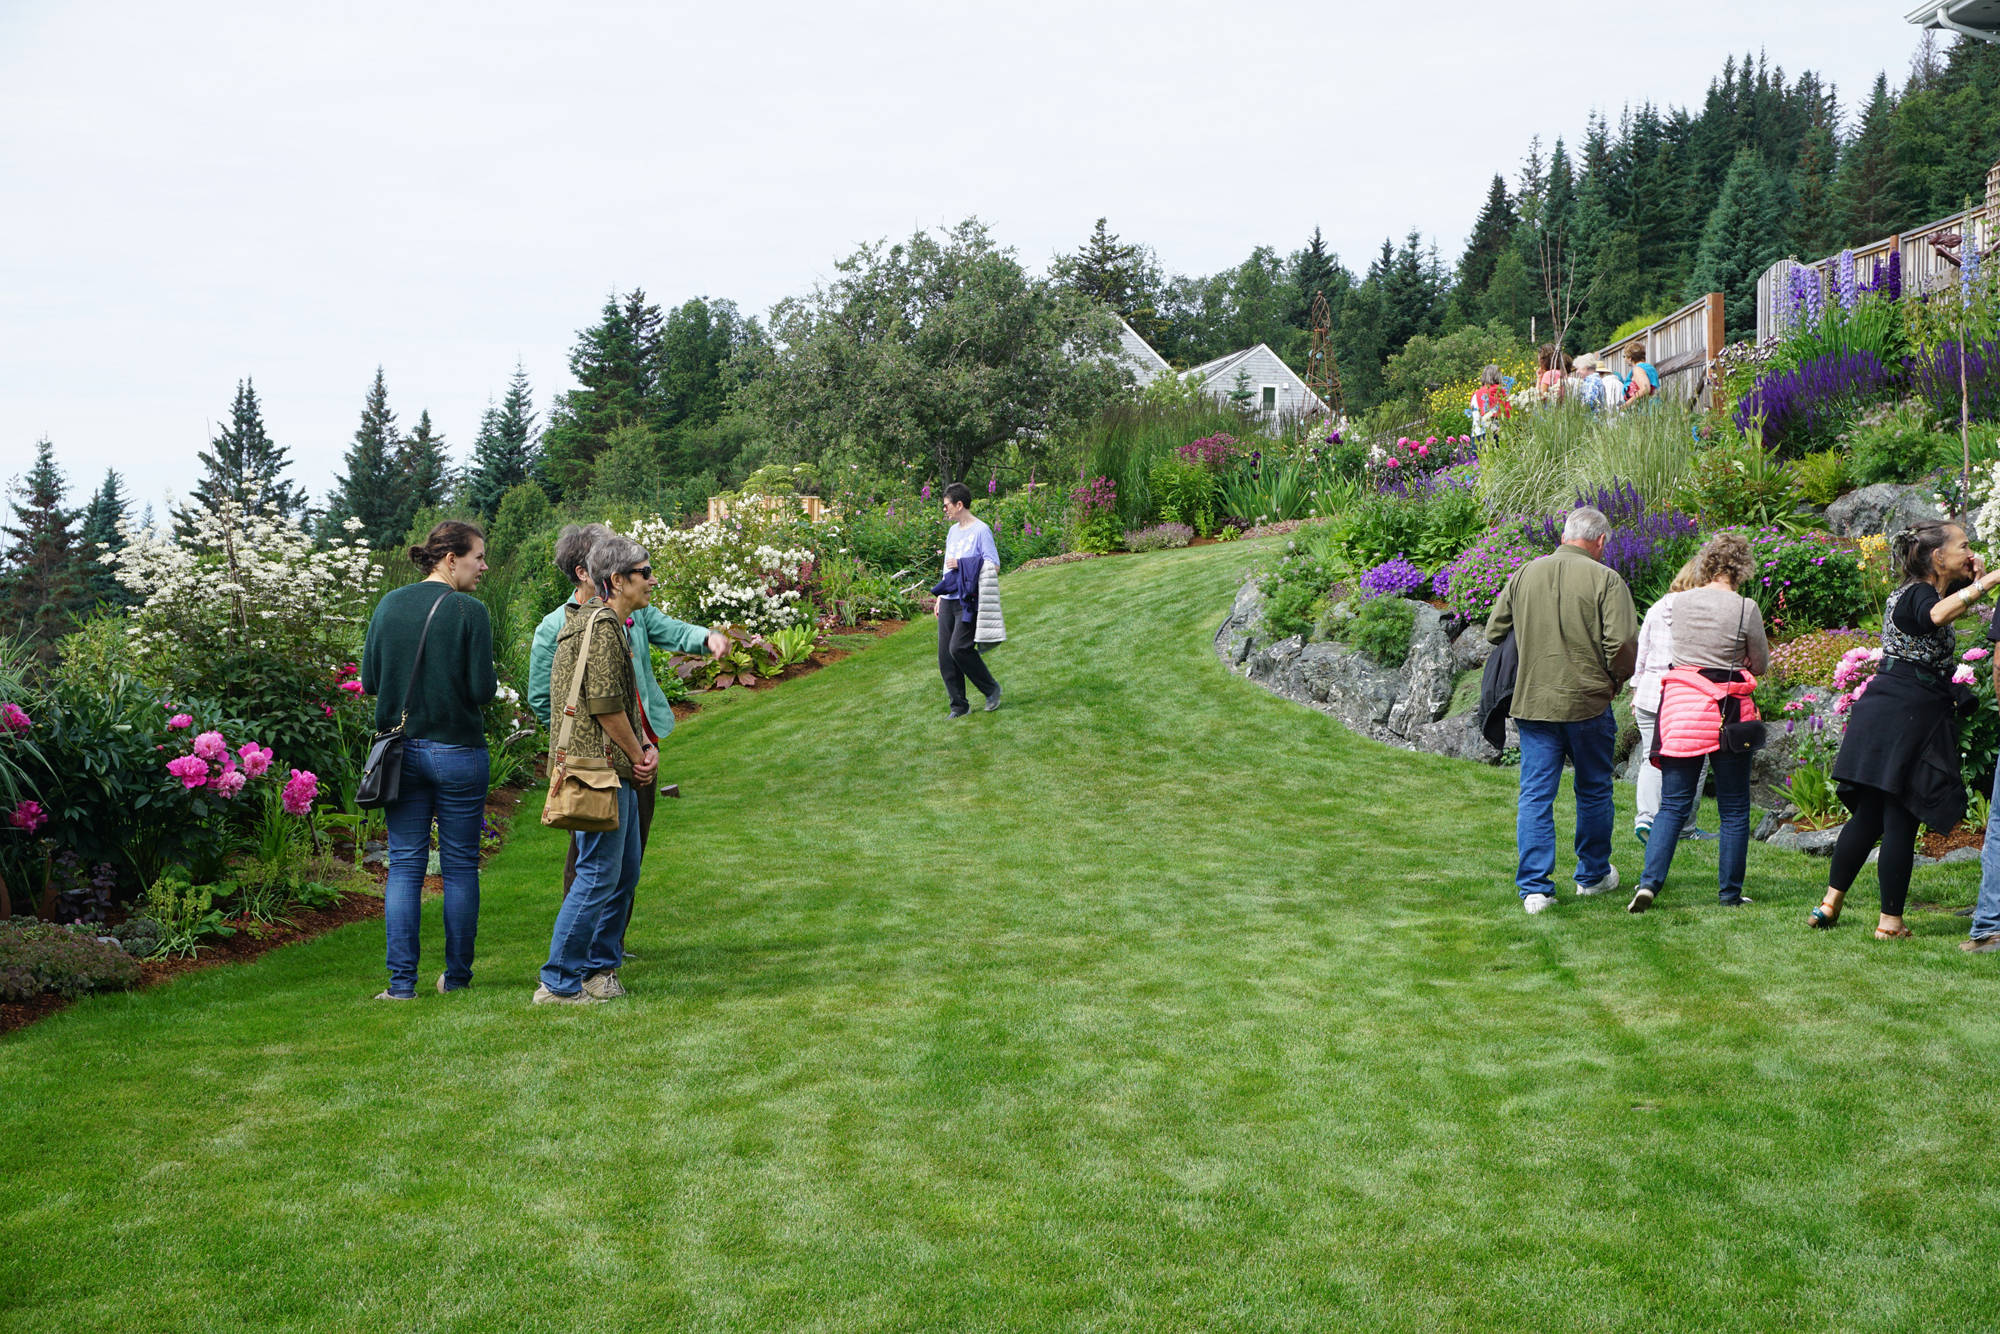 Visitors check out Joan Splinter’s garden on Reber Road off West Hill Road on July 30, 2017 in Homer, Alaska. Her garden was featured in the Homer Garden Club’s 2017 Summer Garden Tours. (Photo by Michael Armstrong/Homer News)